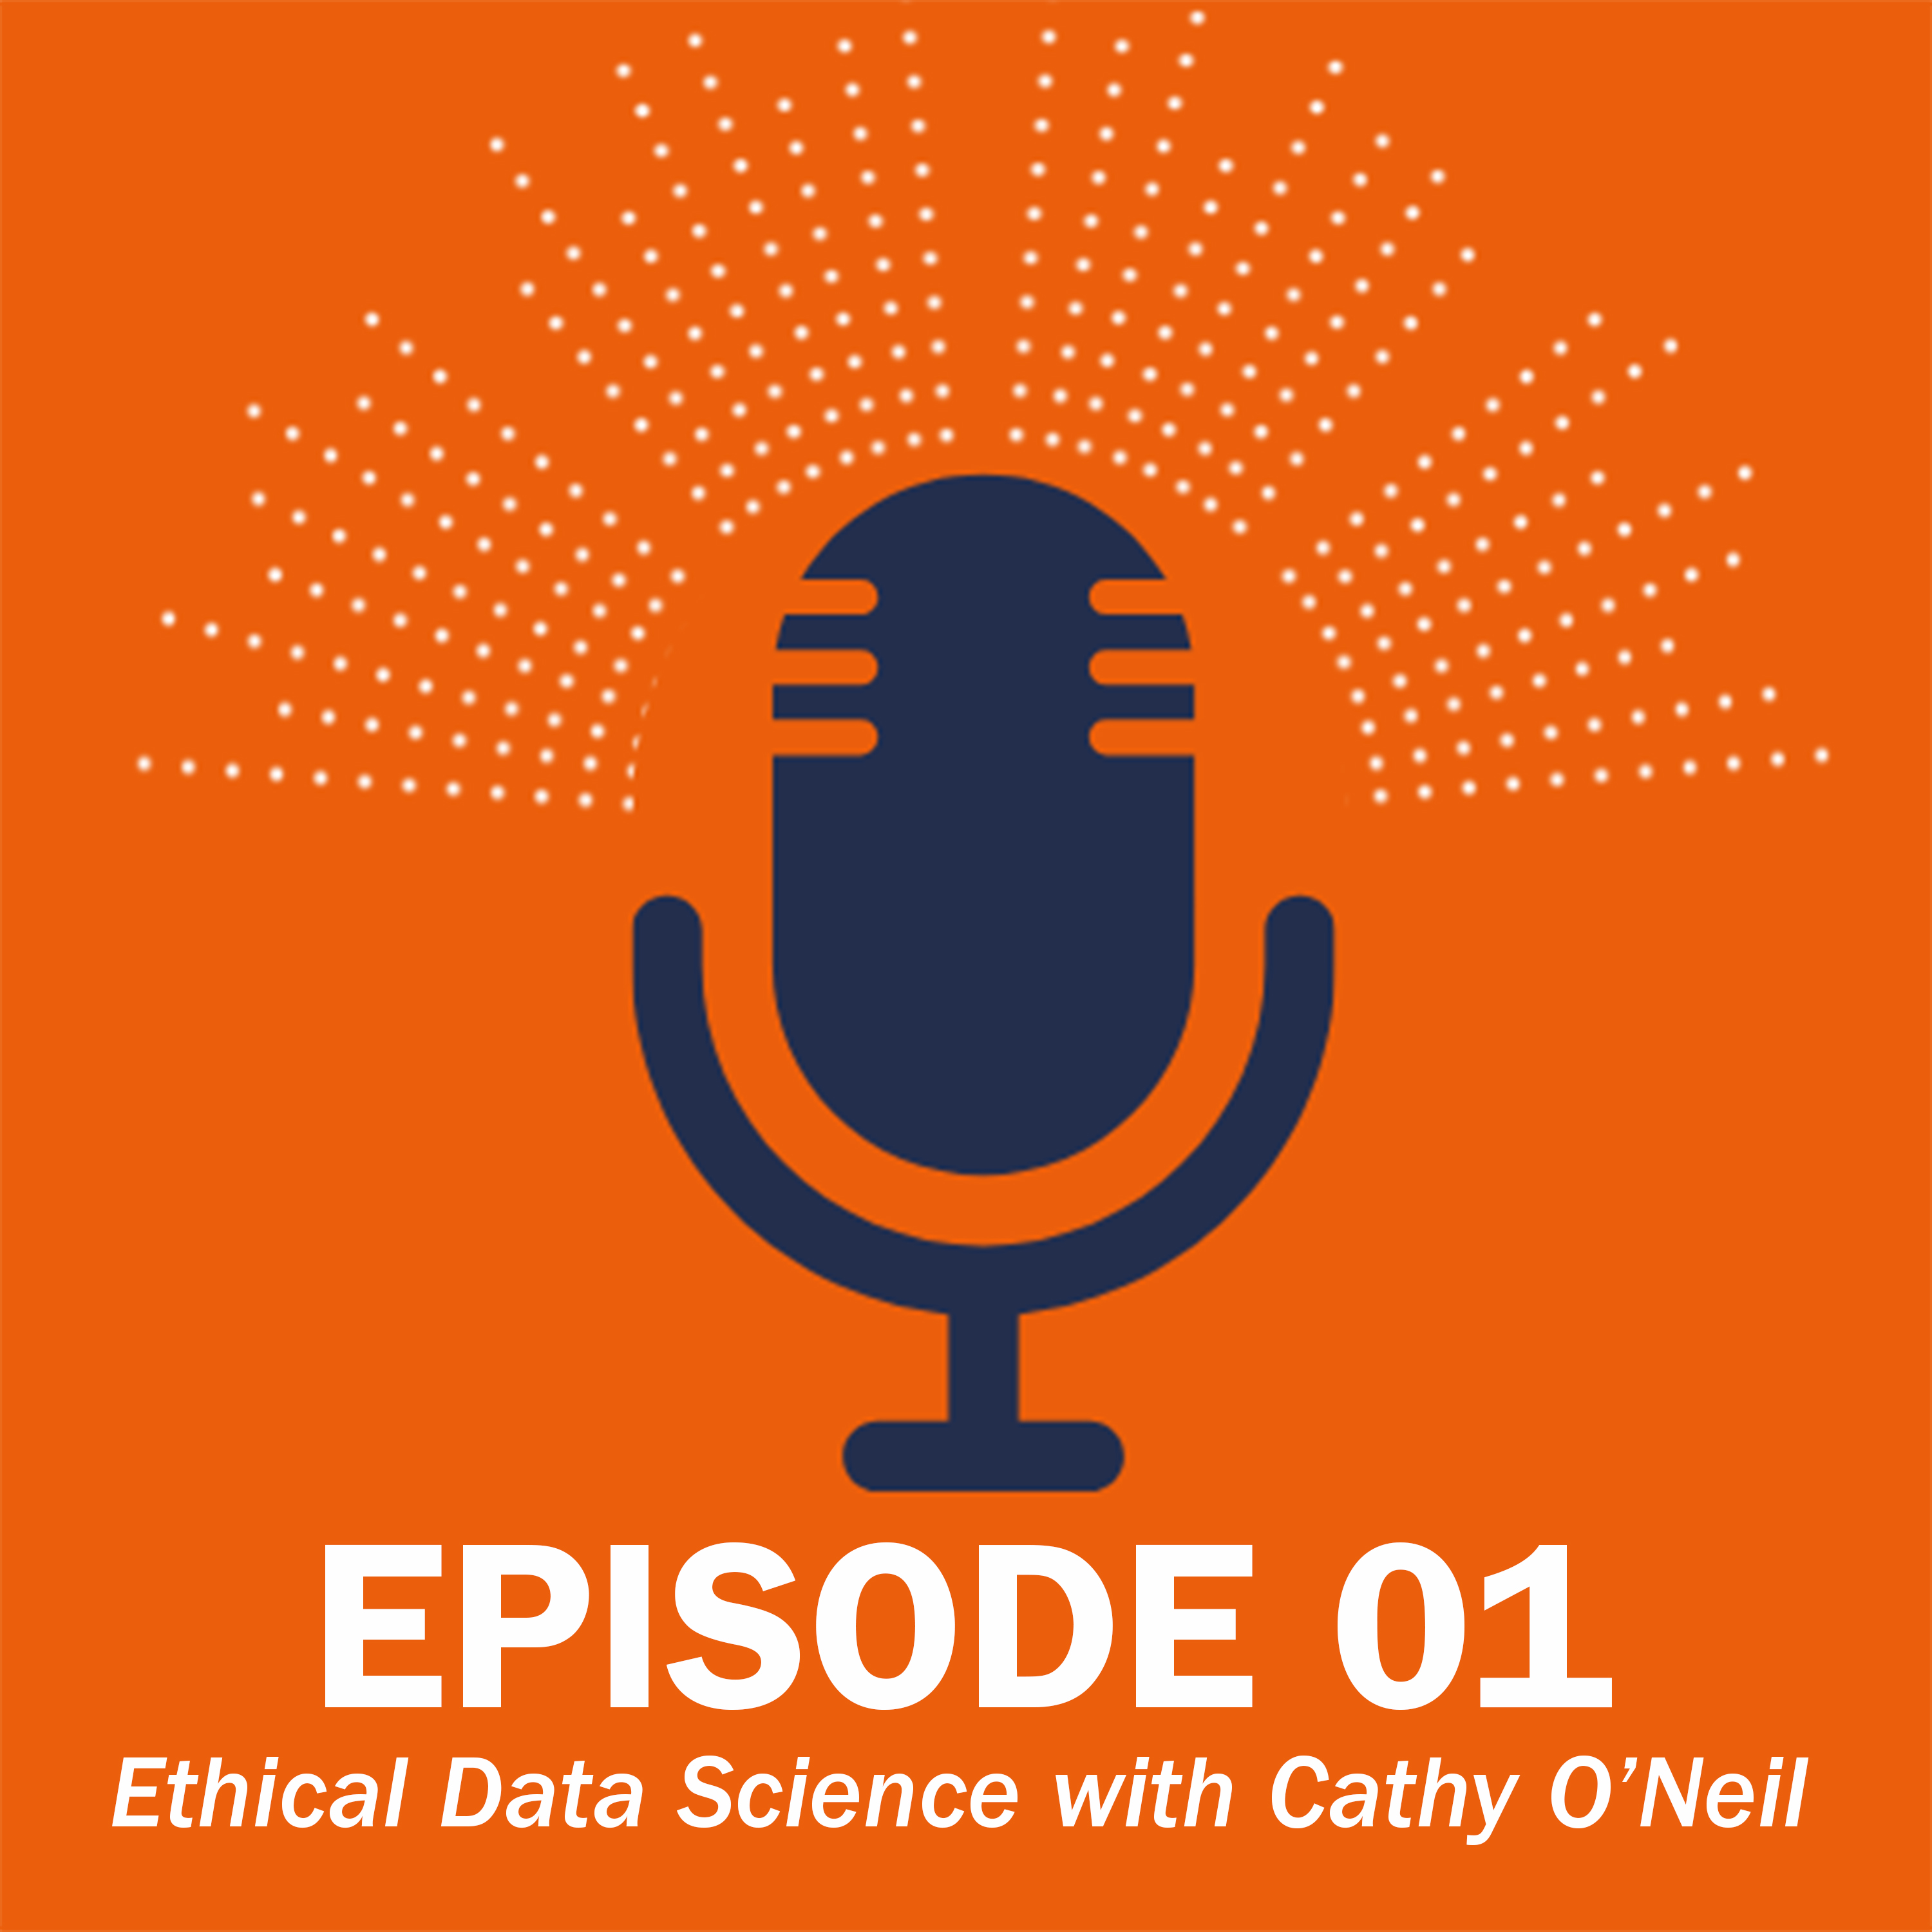 Ethical Data Science with Cathy O'Neil